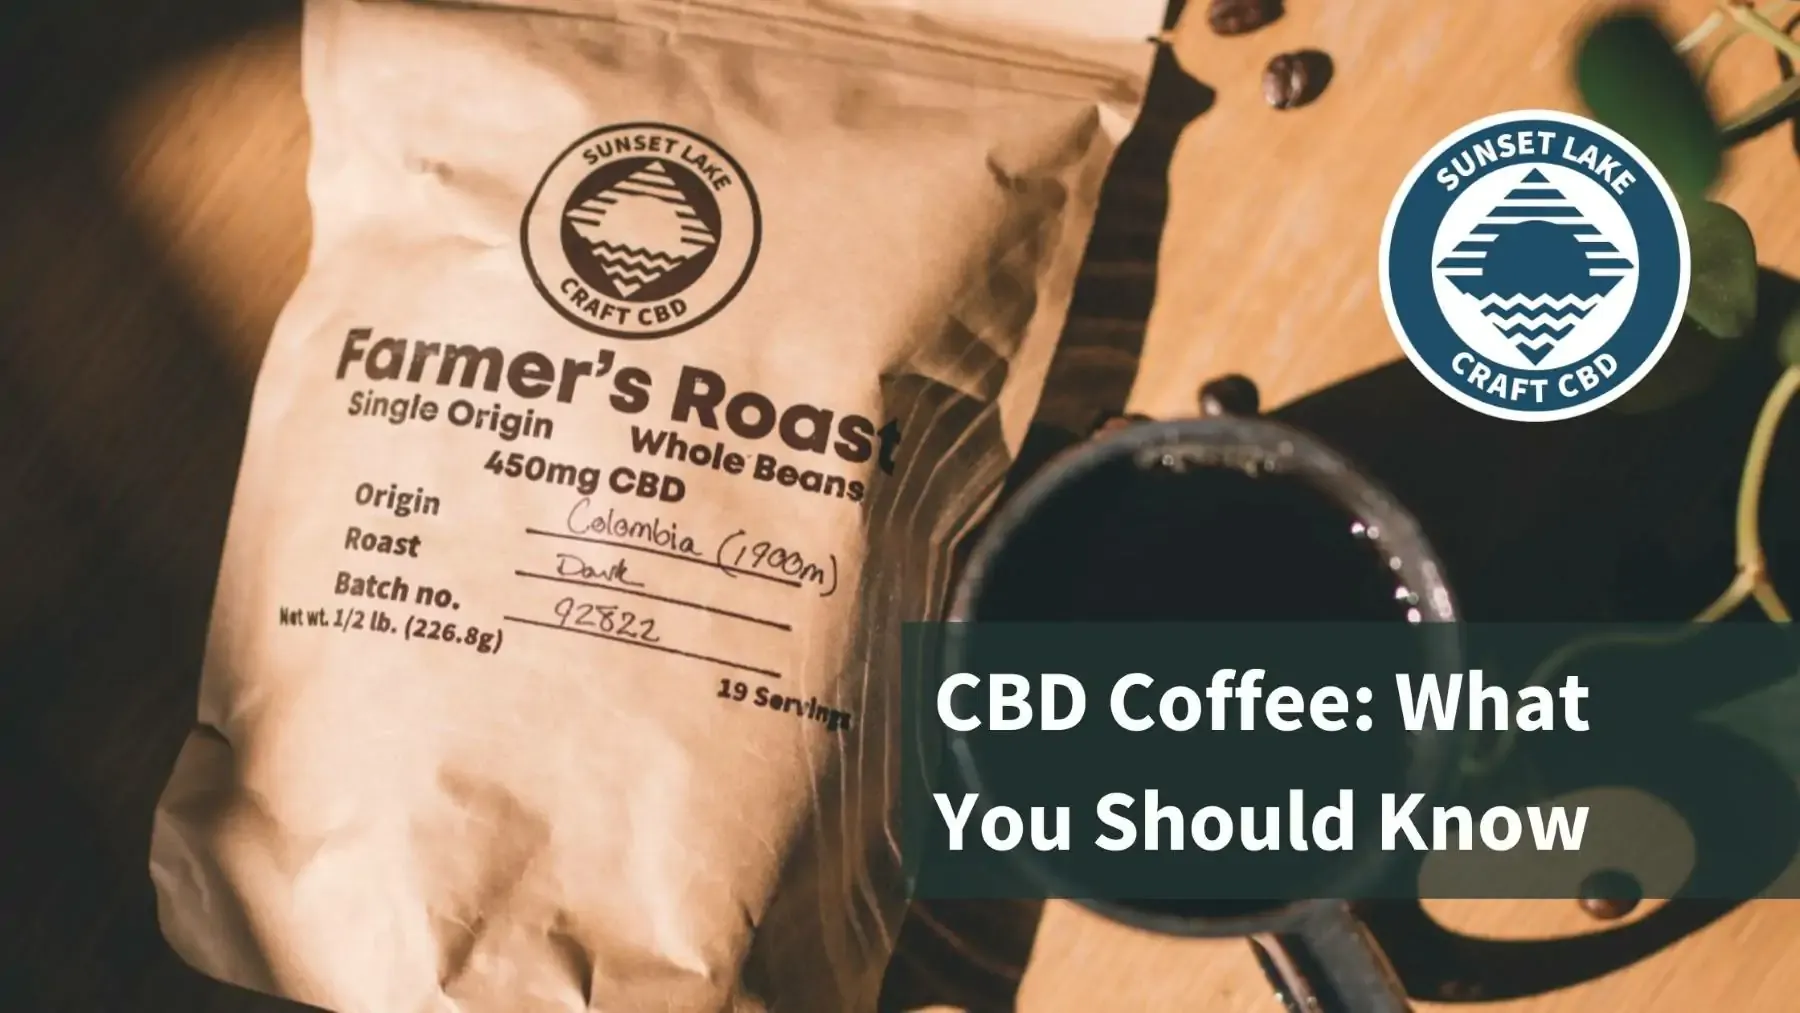 A cup of CBD Coffee. Text reads "CBD Coffee: What You Should Know"